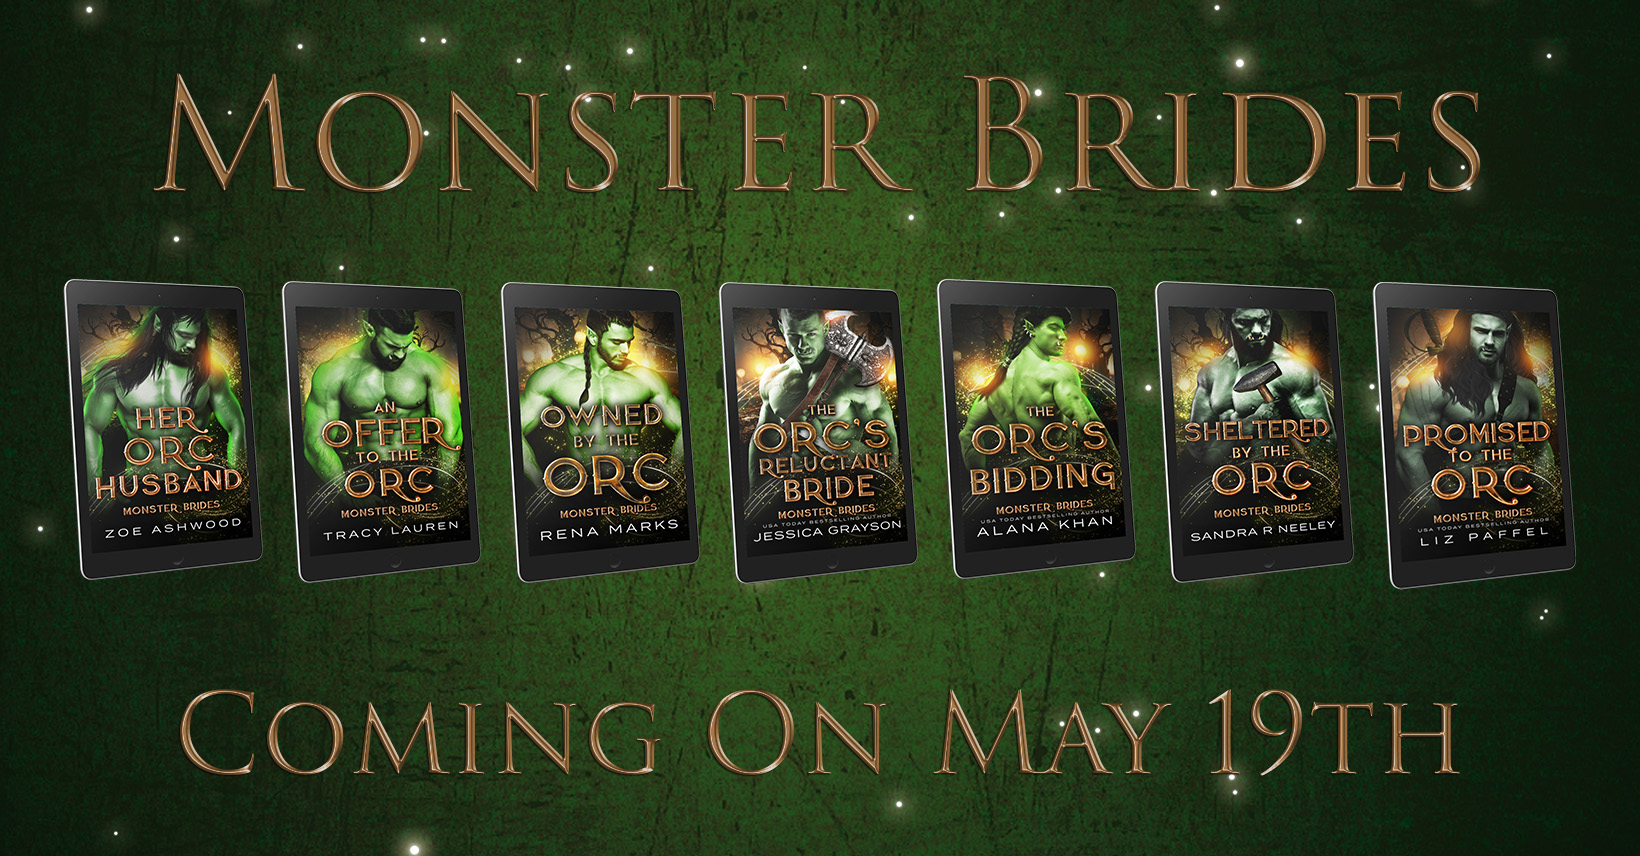 The Monster Brides series - orc fantasy romance